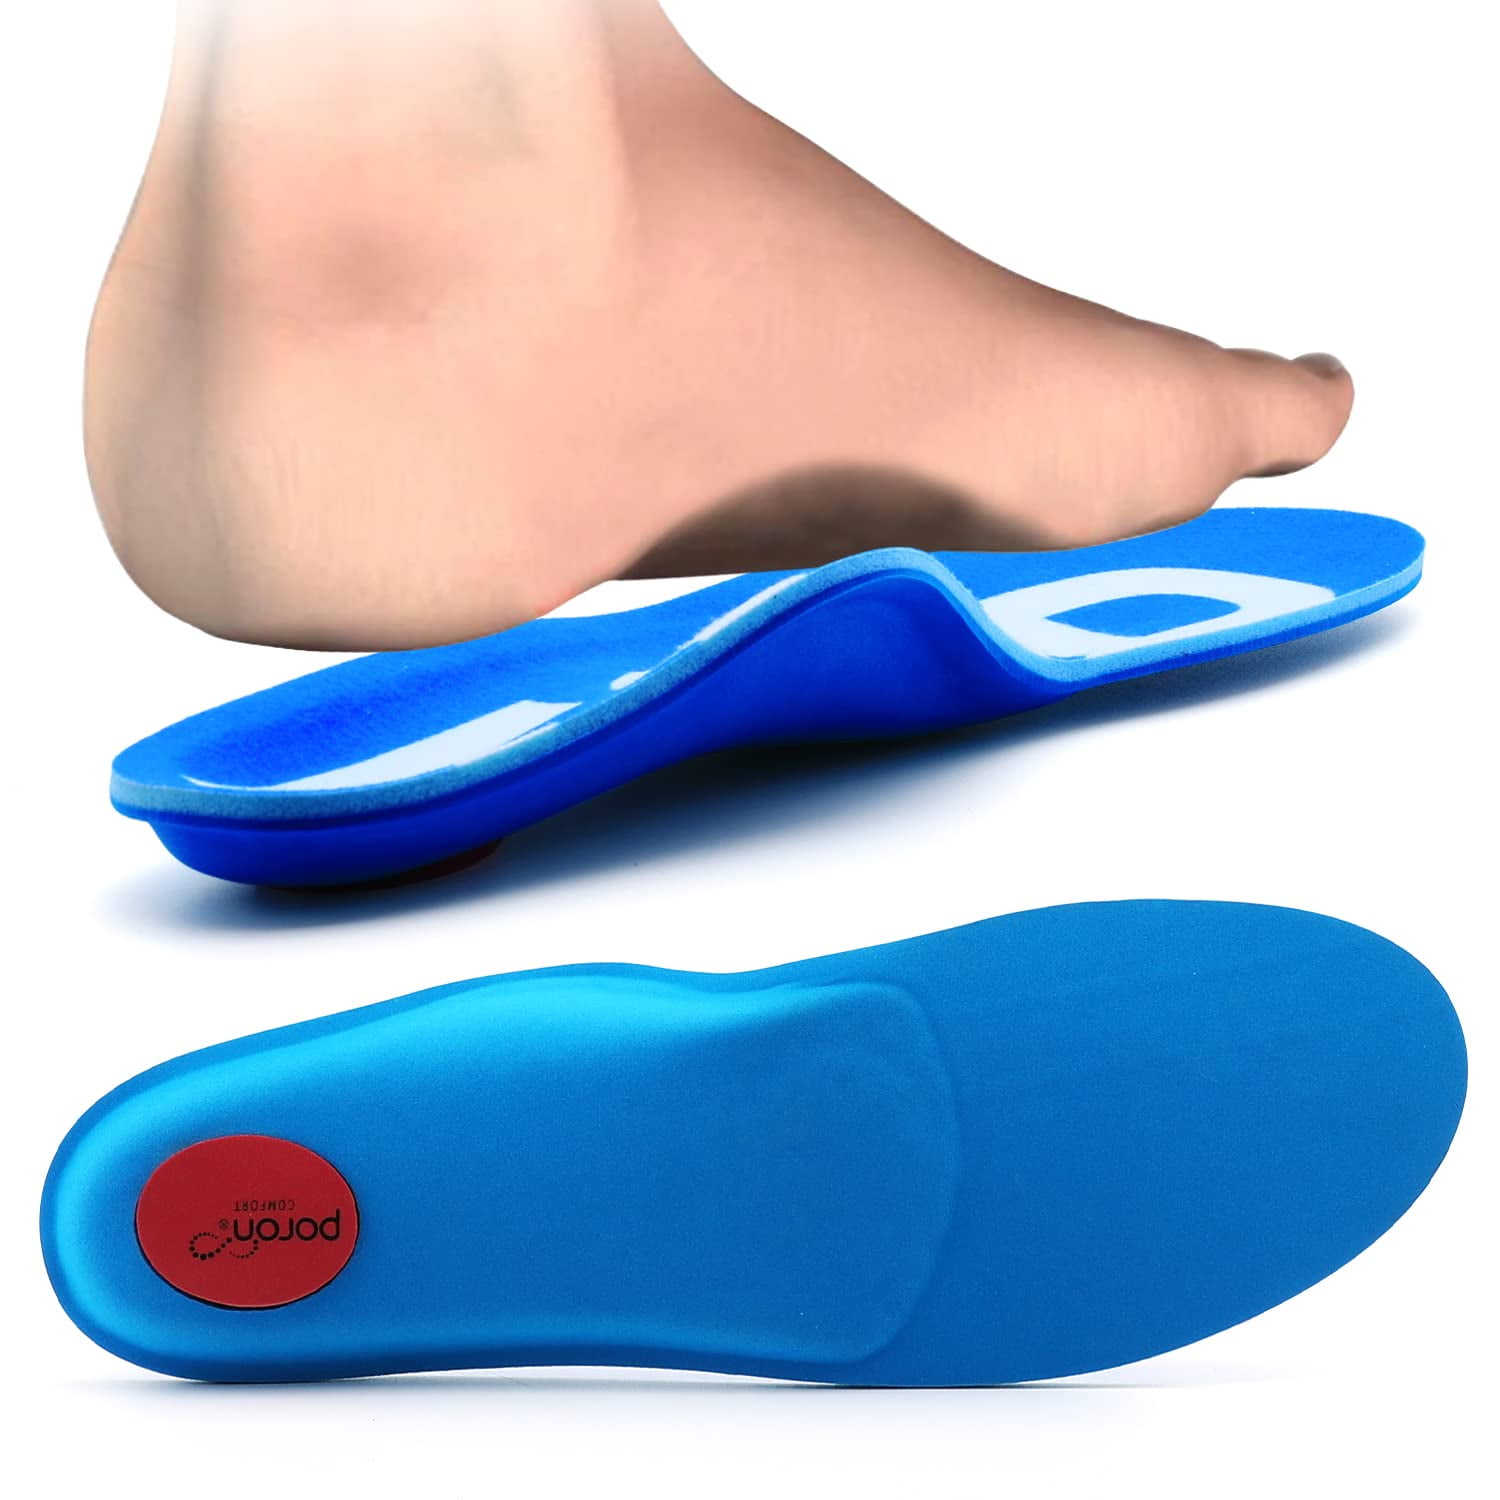 2 Pair Women Exquisite Silicone Gel Heel Cushion  Shoe Pads Insole Foot Care Aid 